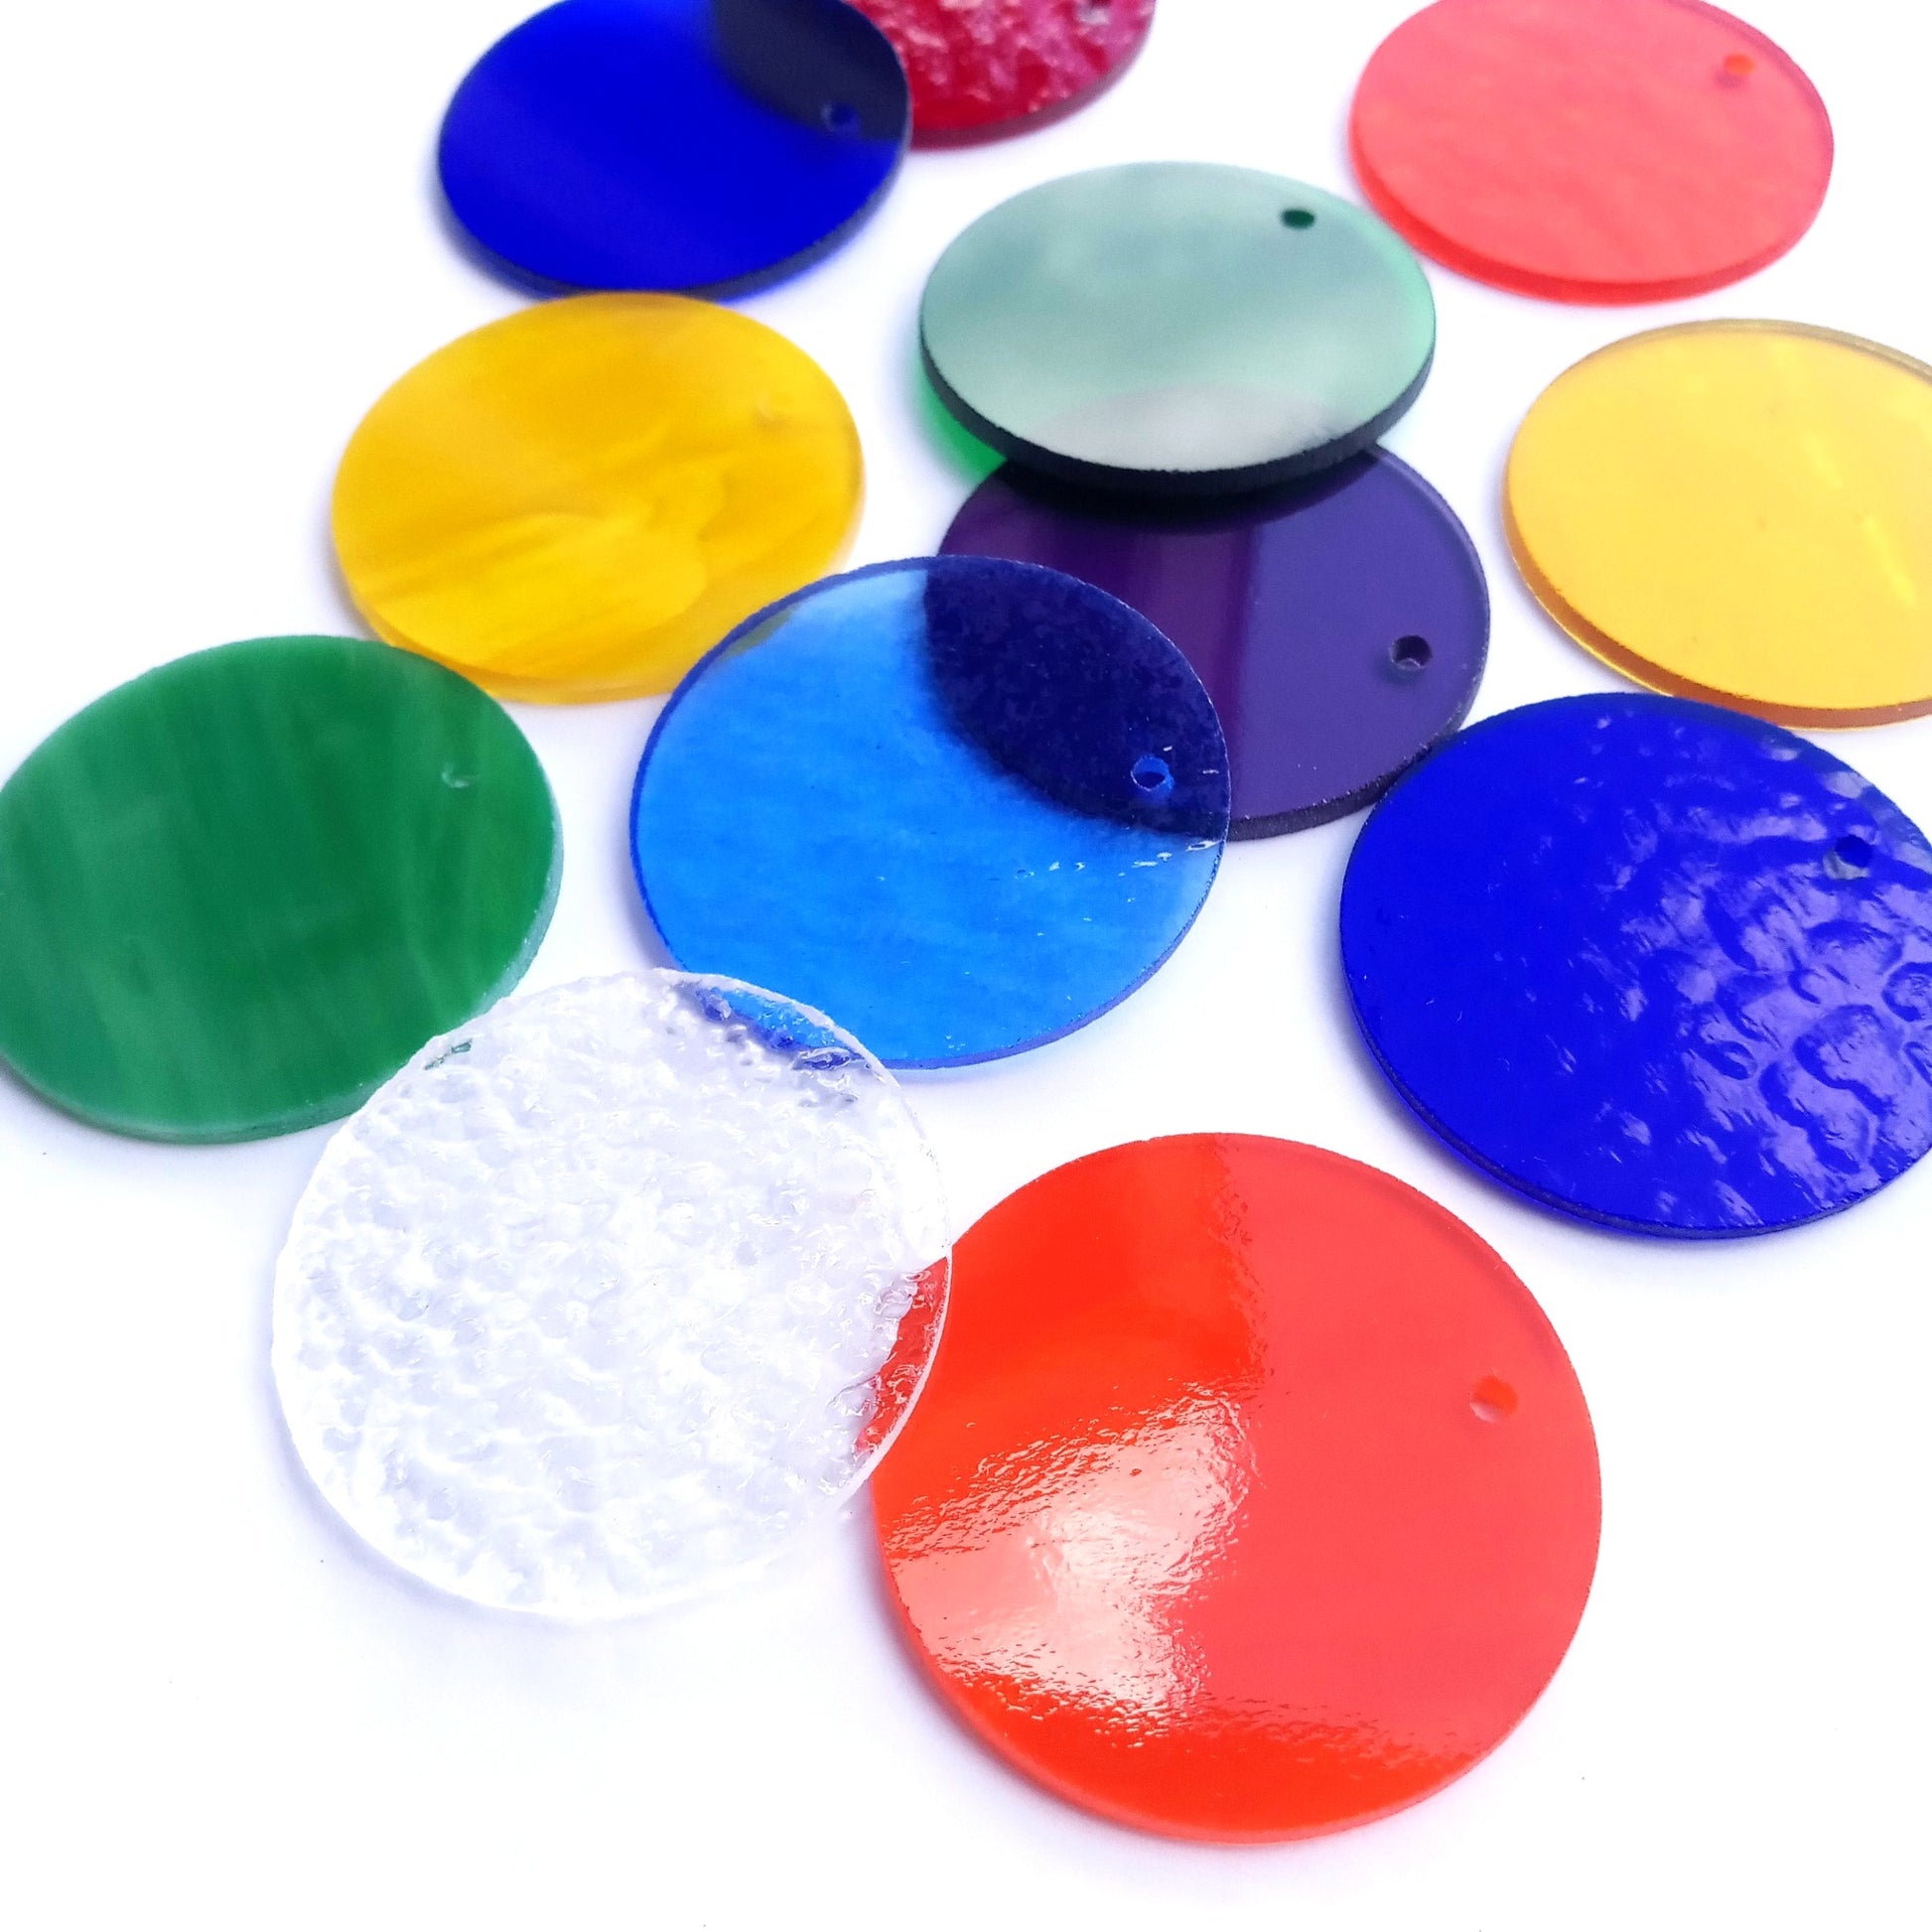 Precut Stained Glass Circles with Holes Drilled for Hanging, 2" Glass Circles for Windchimes, Ornaments, Glass Art, Assorted Colors, All Translucent and Wispy Stained Glass